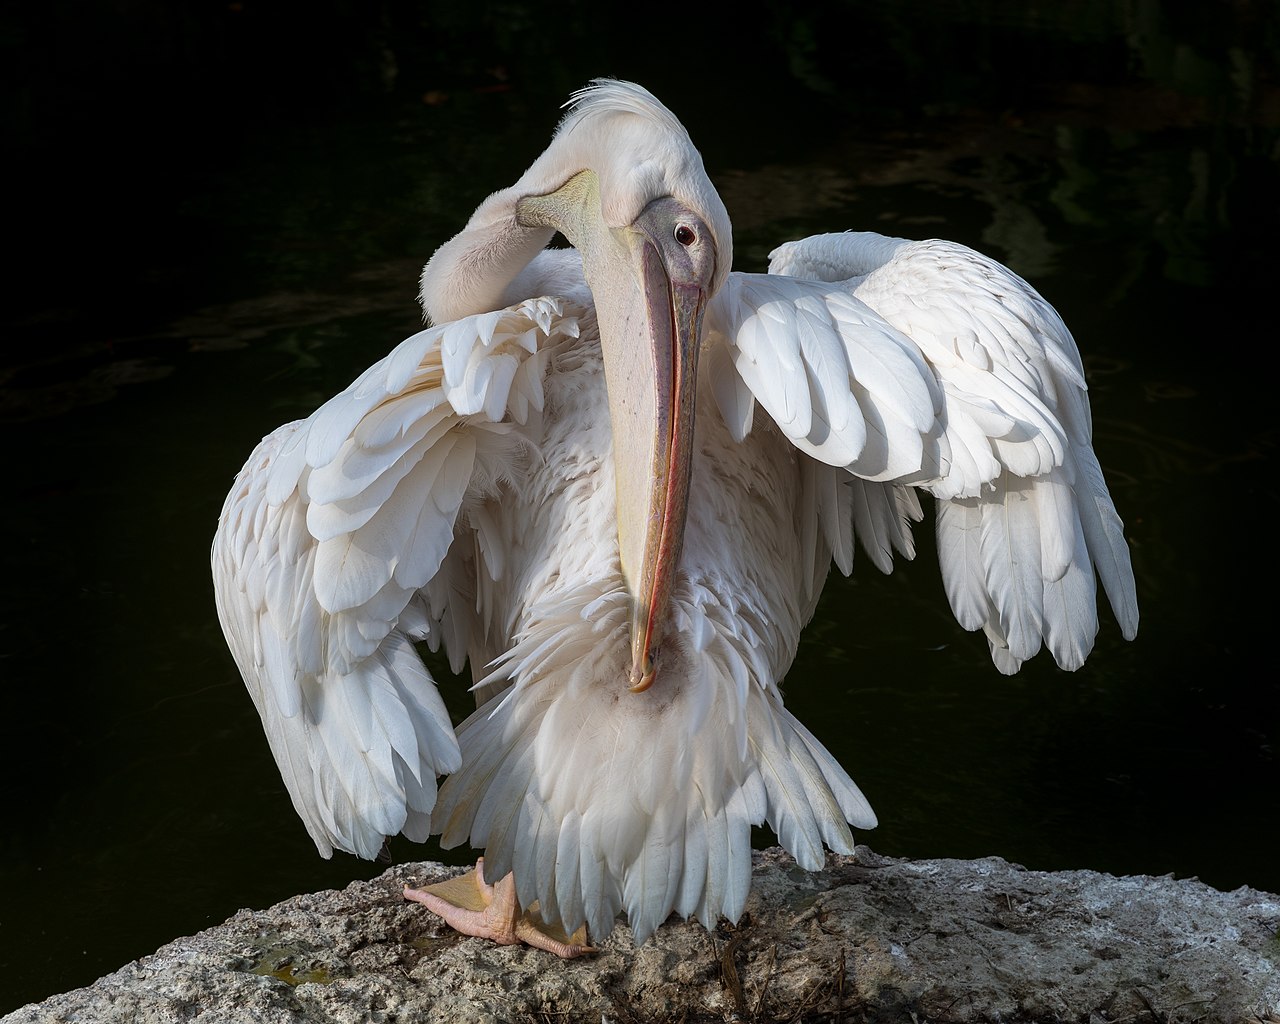  Pelecanus onocrotalus (Great white pelican) cleaning the feathers of its back